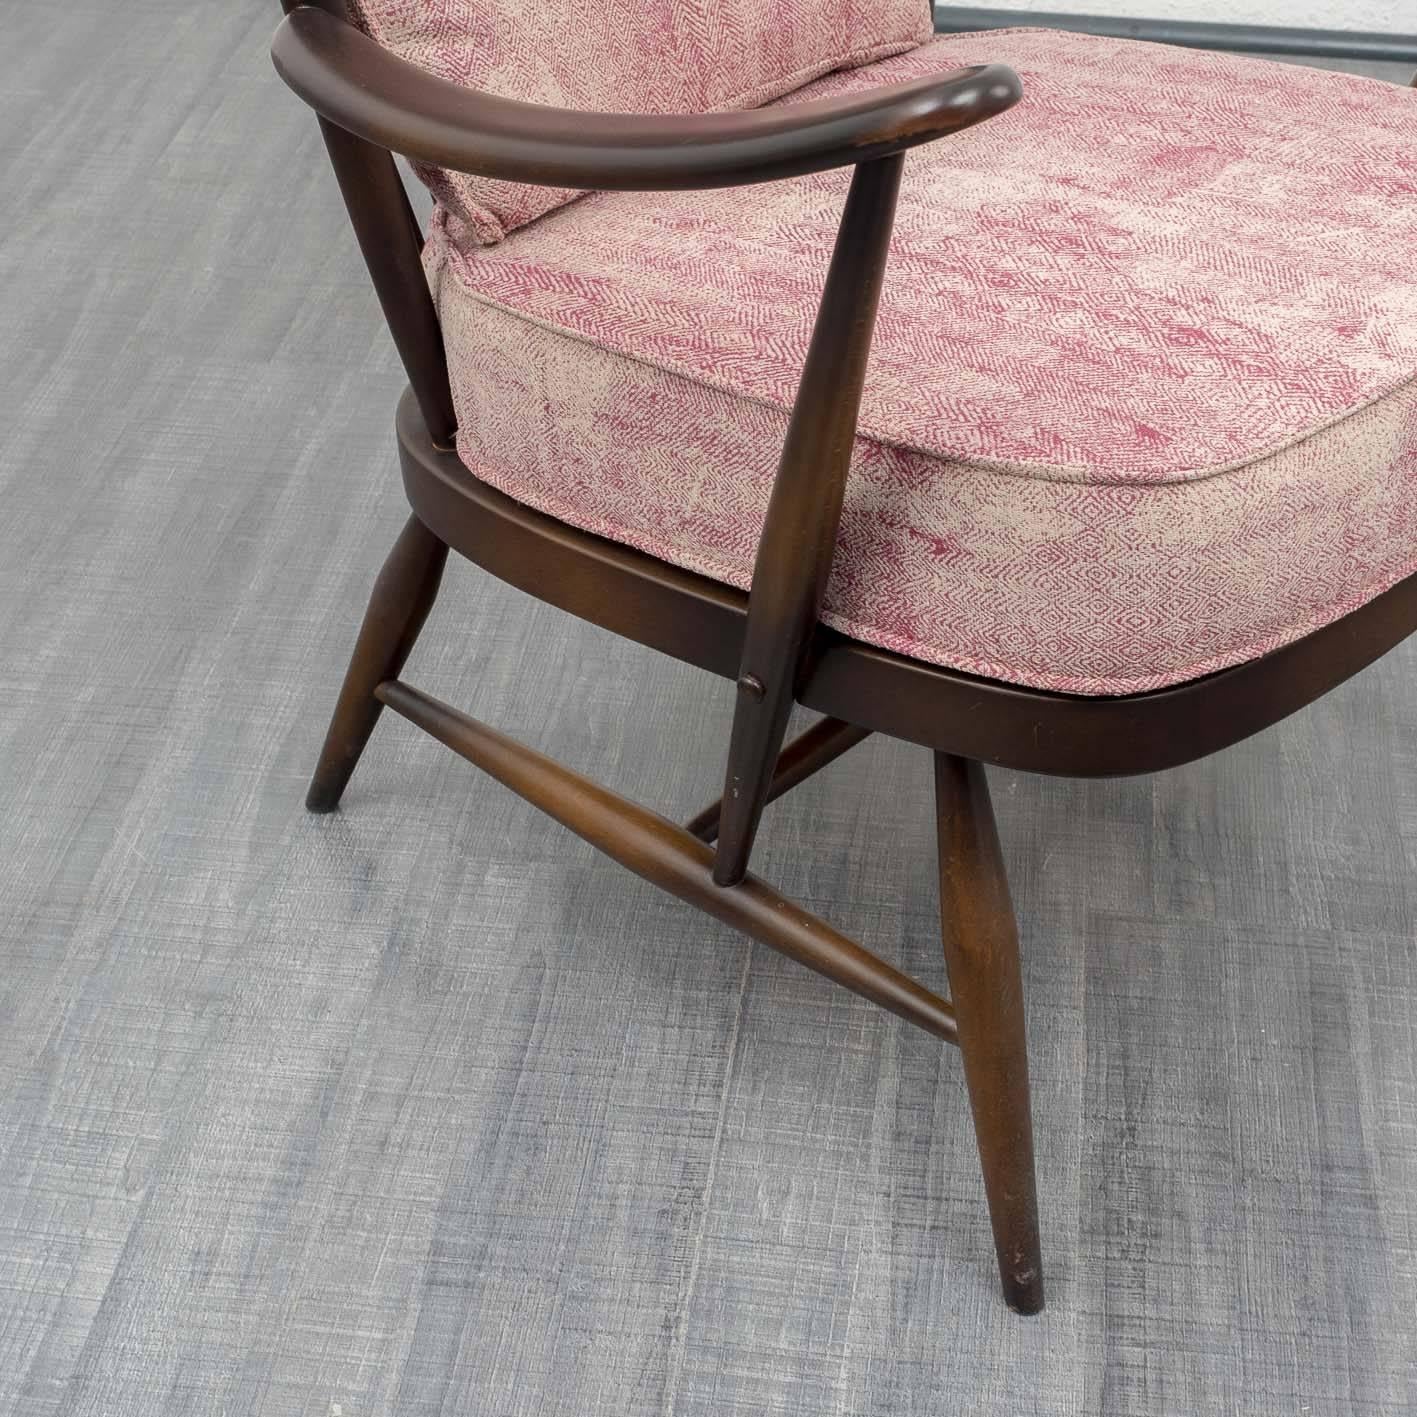 Ash 1950s Armchair and Ottoman, L. Ercolani for Ercol, New Upholstery For Sale